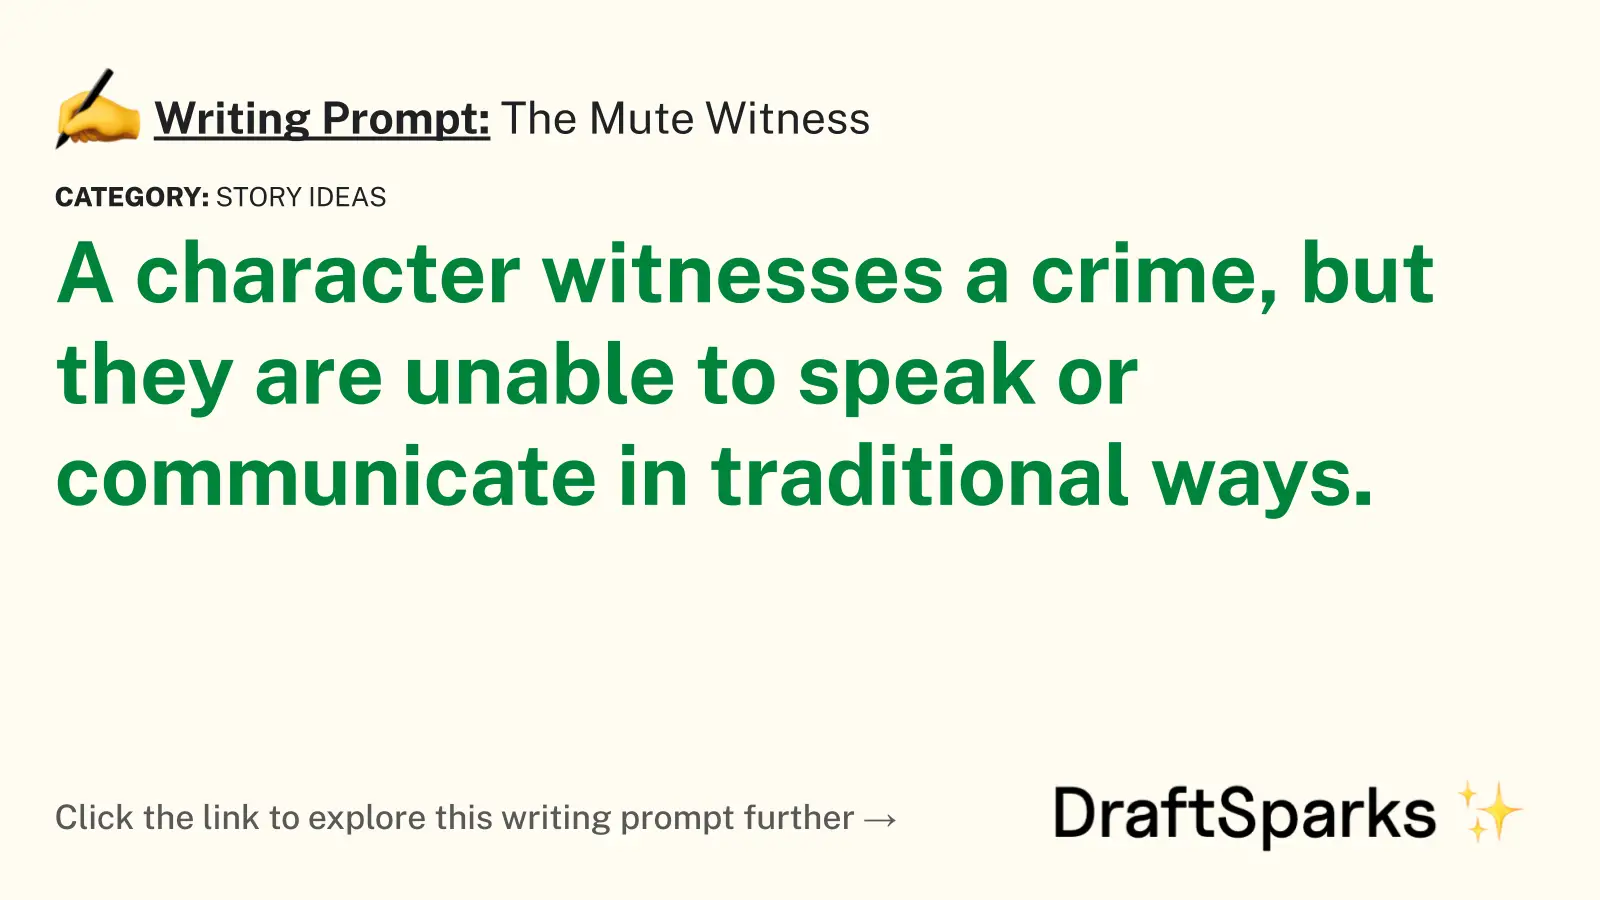 The Mute Witness